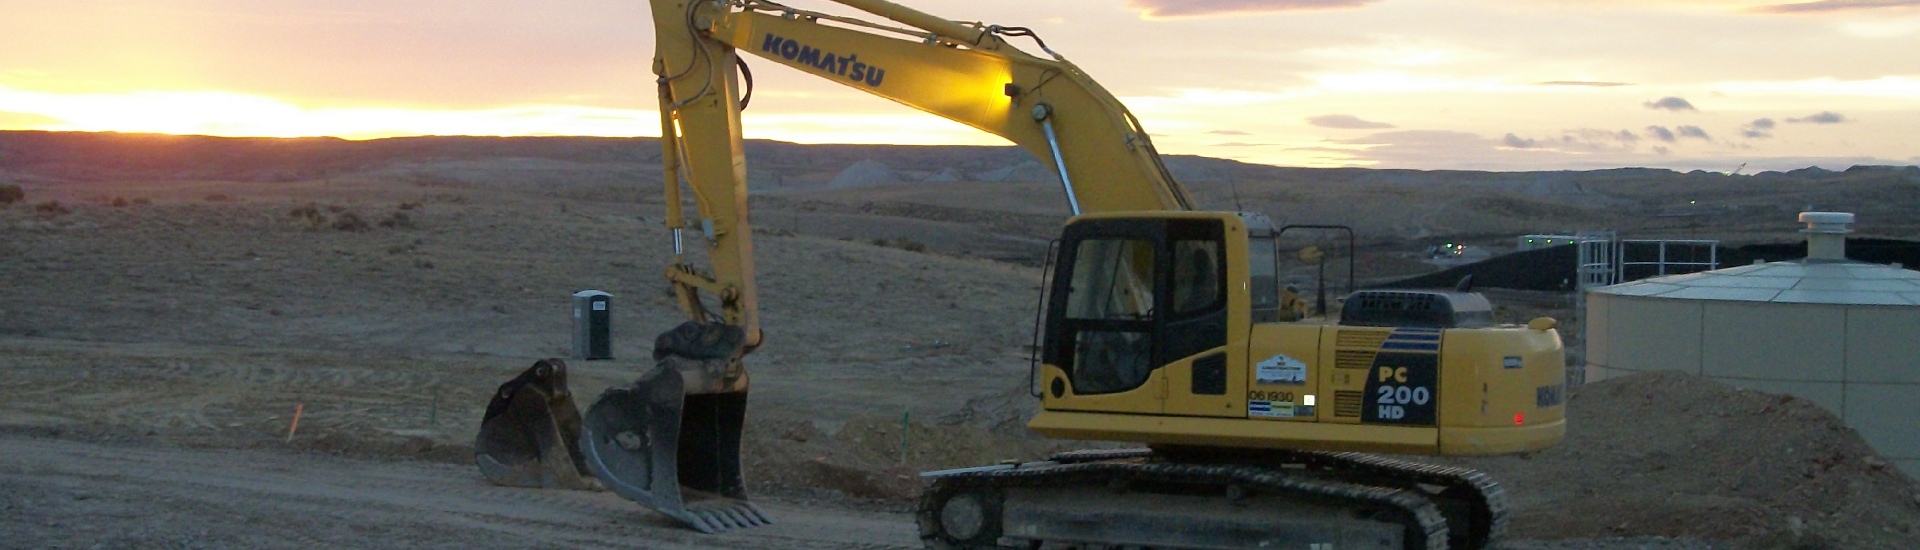 backhoe working at sunset